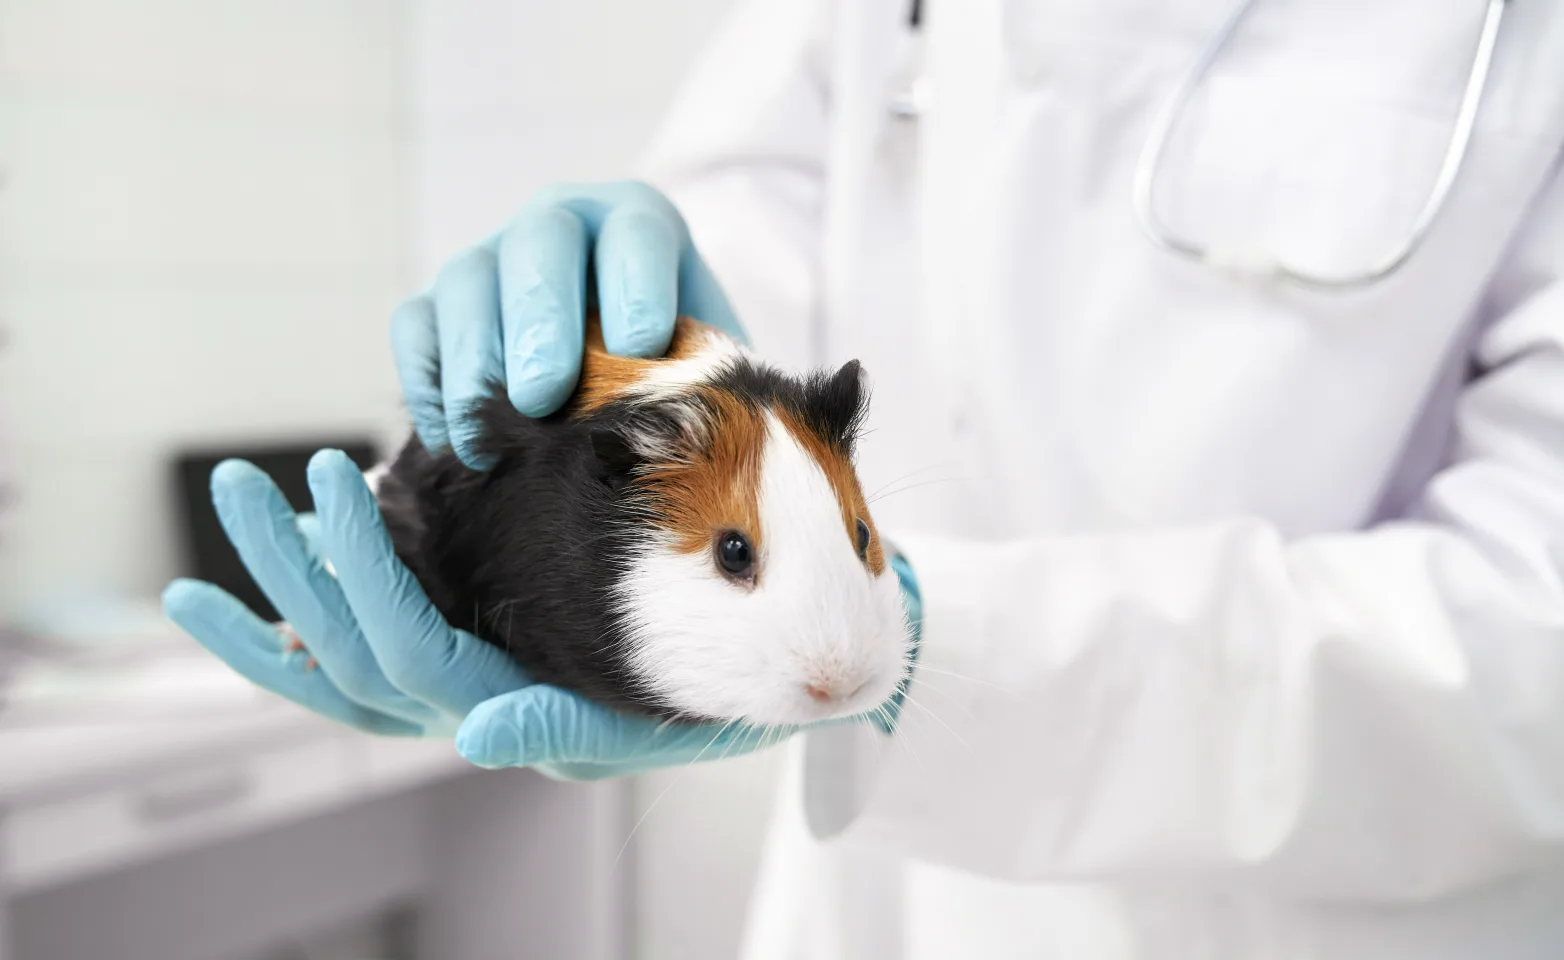 A guinea pig being held by a vet